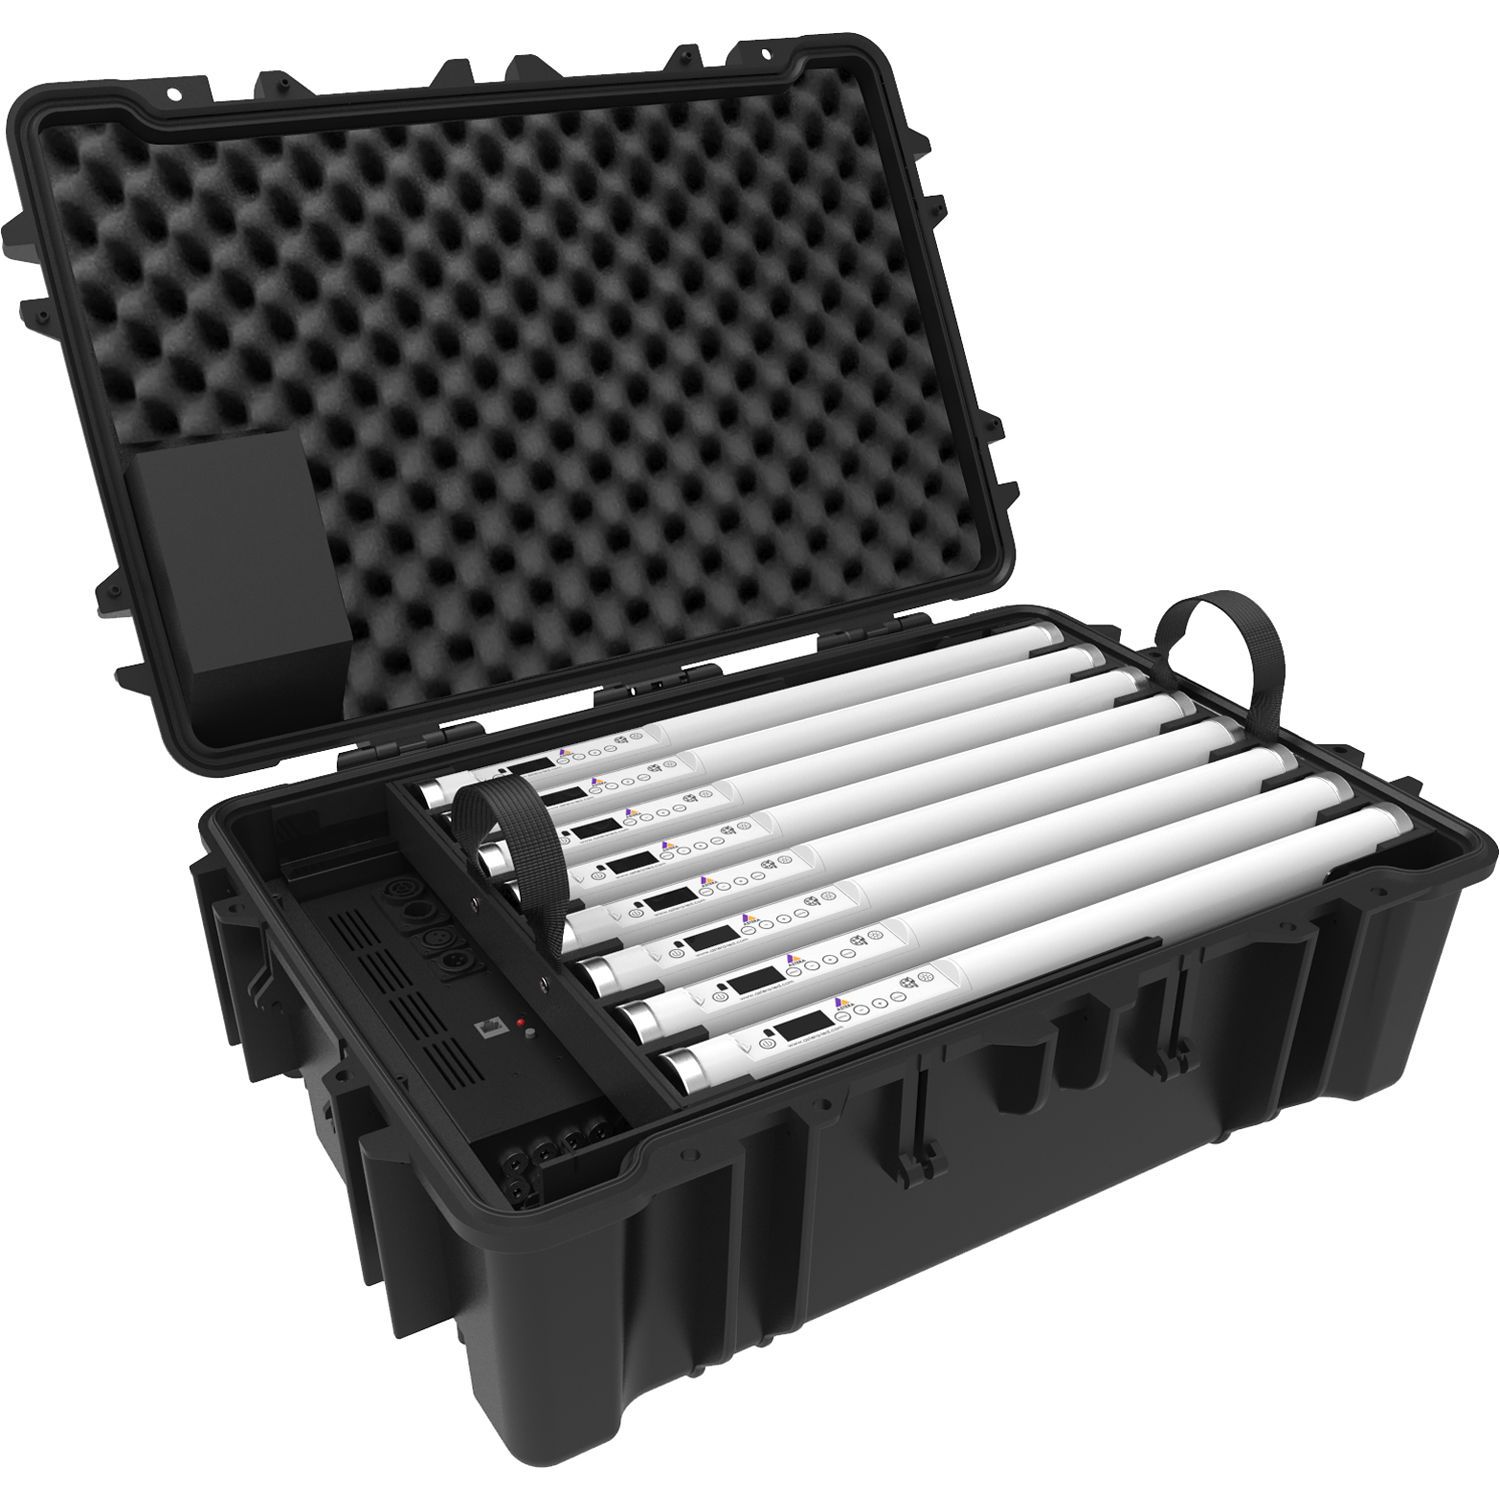 ASTERA - Set of 8 Helios Tubes + Charging Case + Accessories